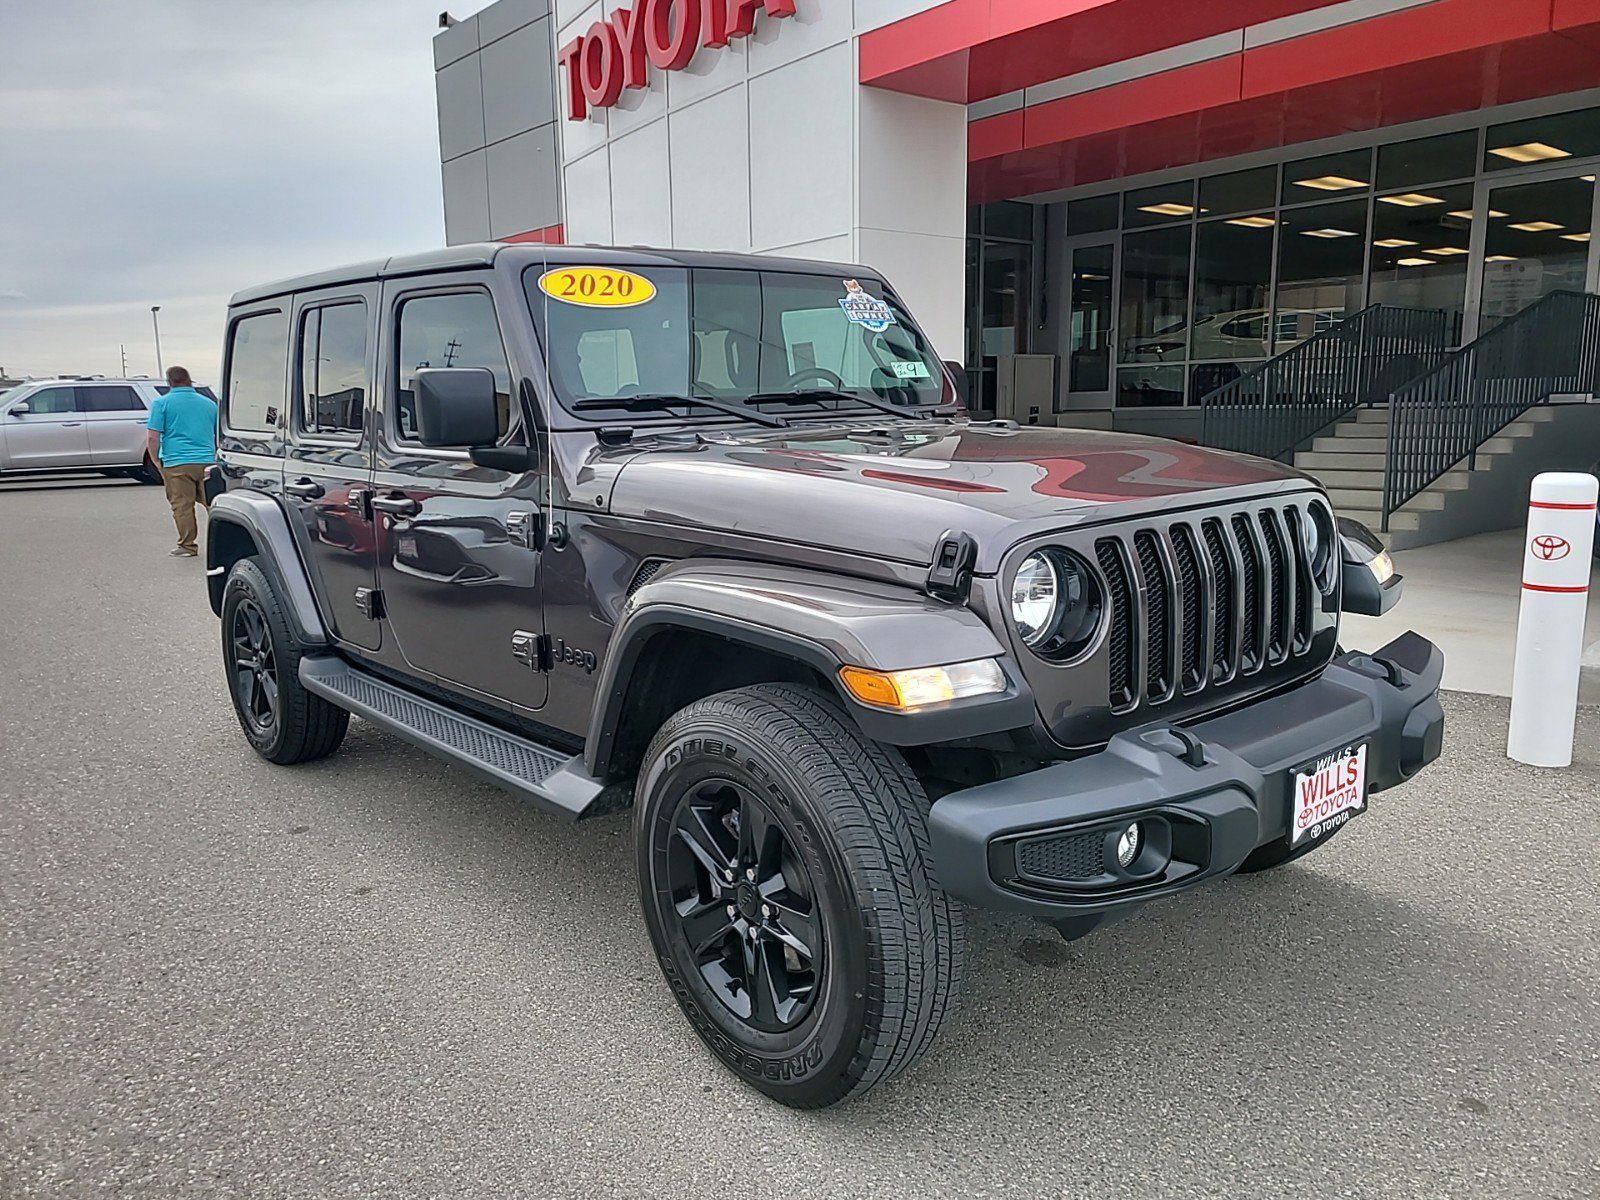 2020 - Jeep - Wrangler Unlimited - $42,788